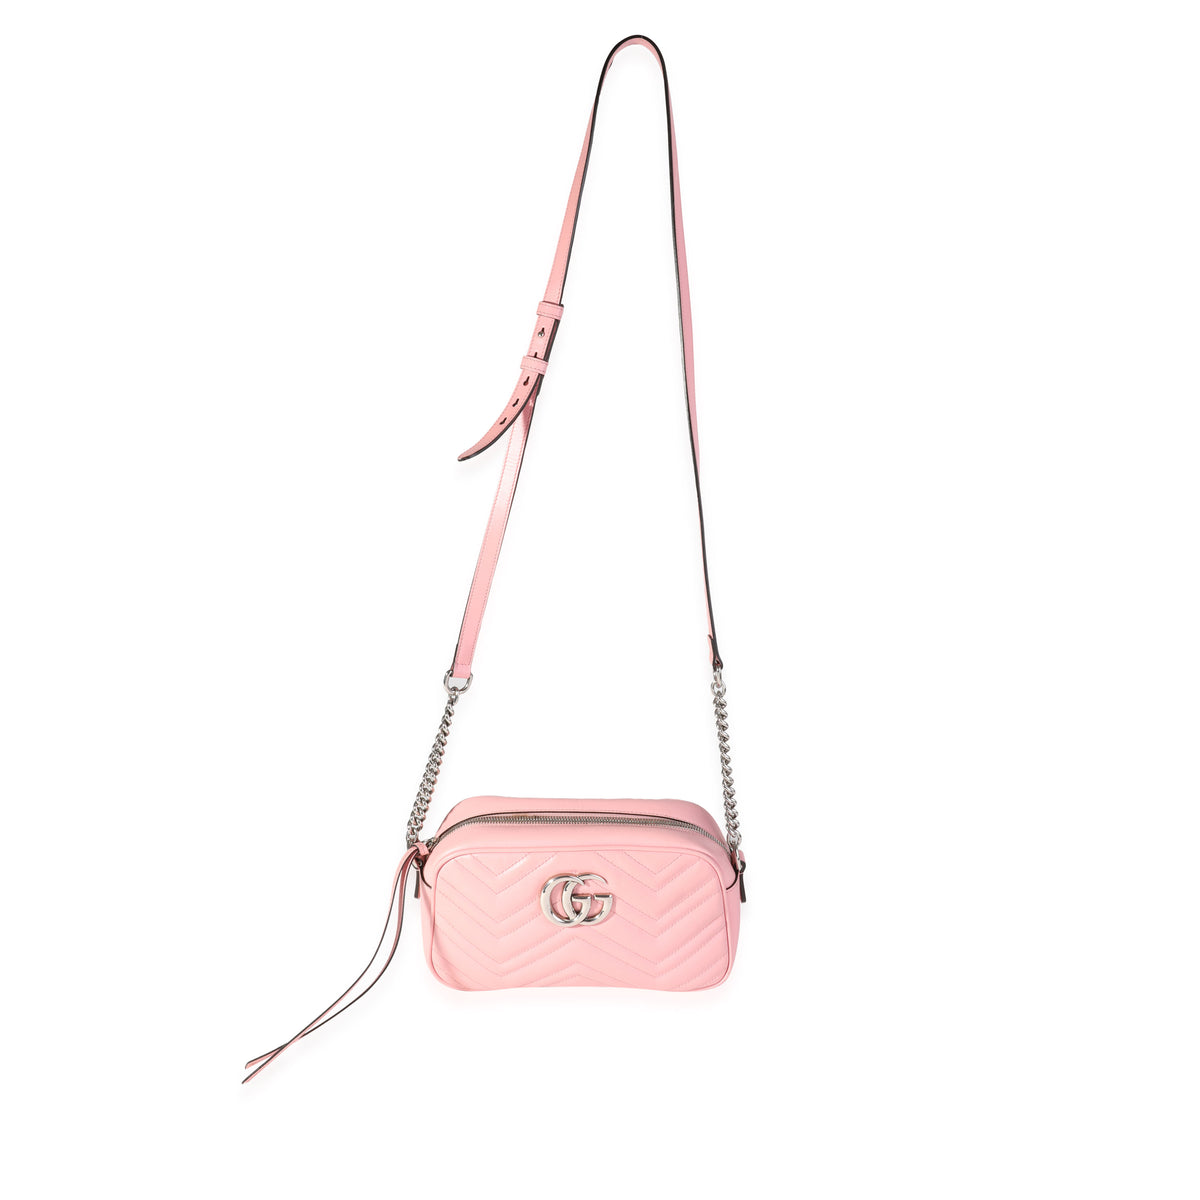 Gucci Pink Matelassé Leather Small Marmont Bag